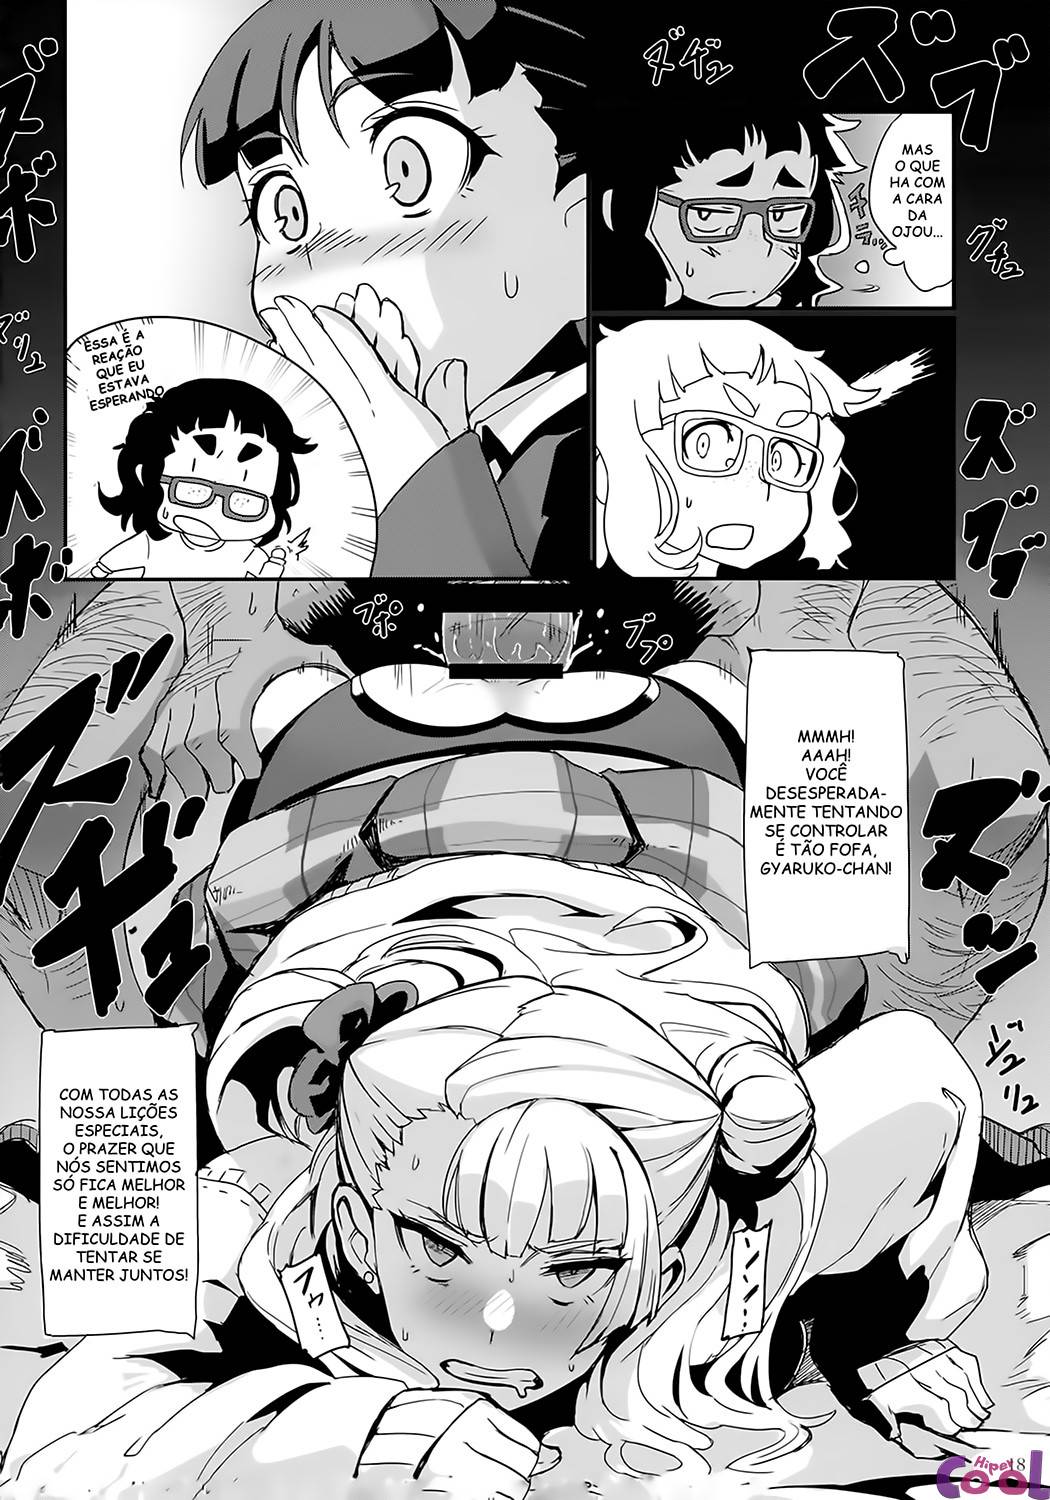 galko-ah--chapter-01-page-18.jpg